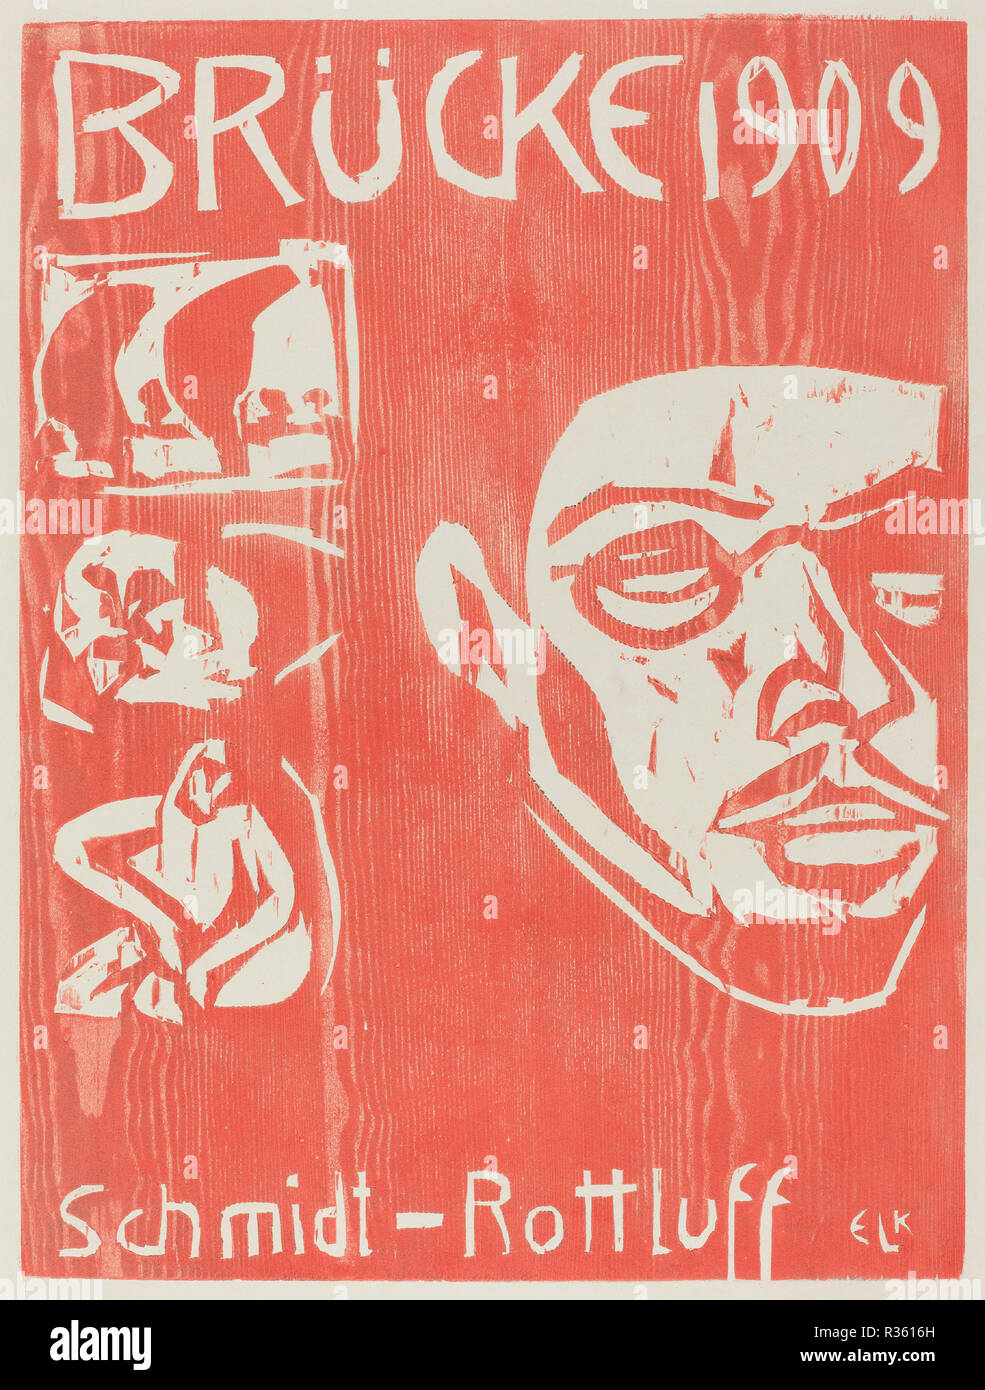 Cover of the Fourth Yearbook of the Artist Group the Brucke. Dated: 1909. Medium: woodcut in red. Museum: National Gallery of Art, Washington DC. Author: ERNST LUDWIG KIRCHNER. Stock Photo